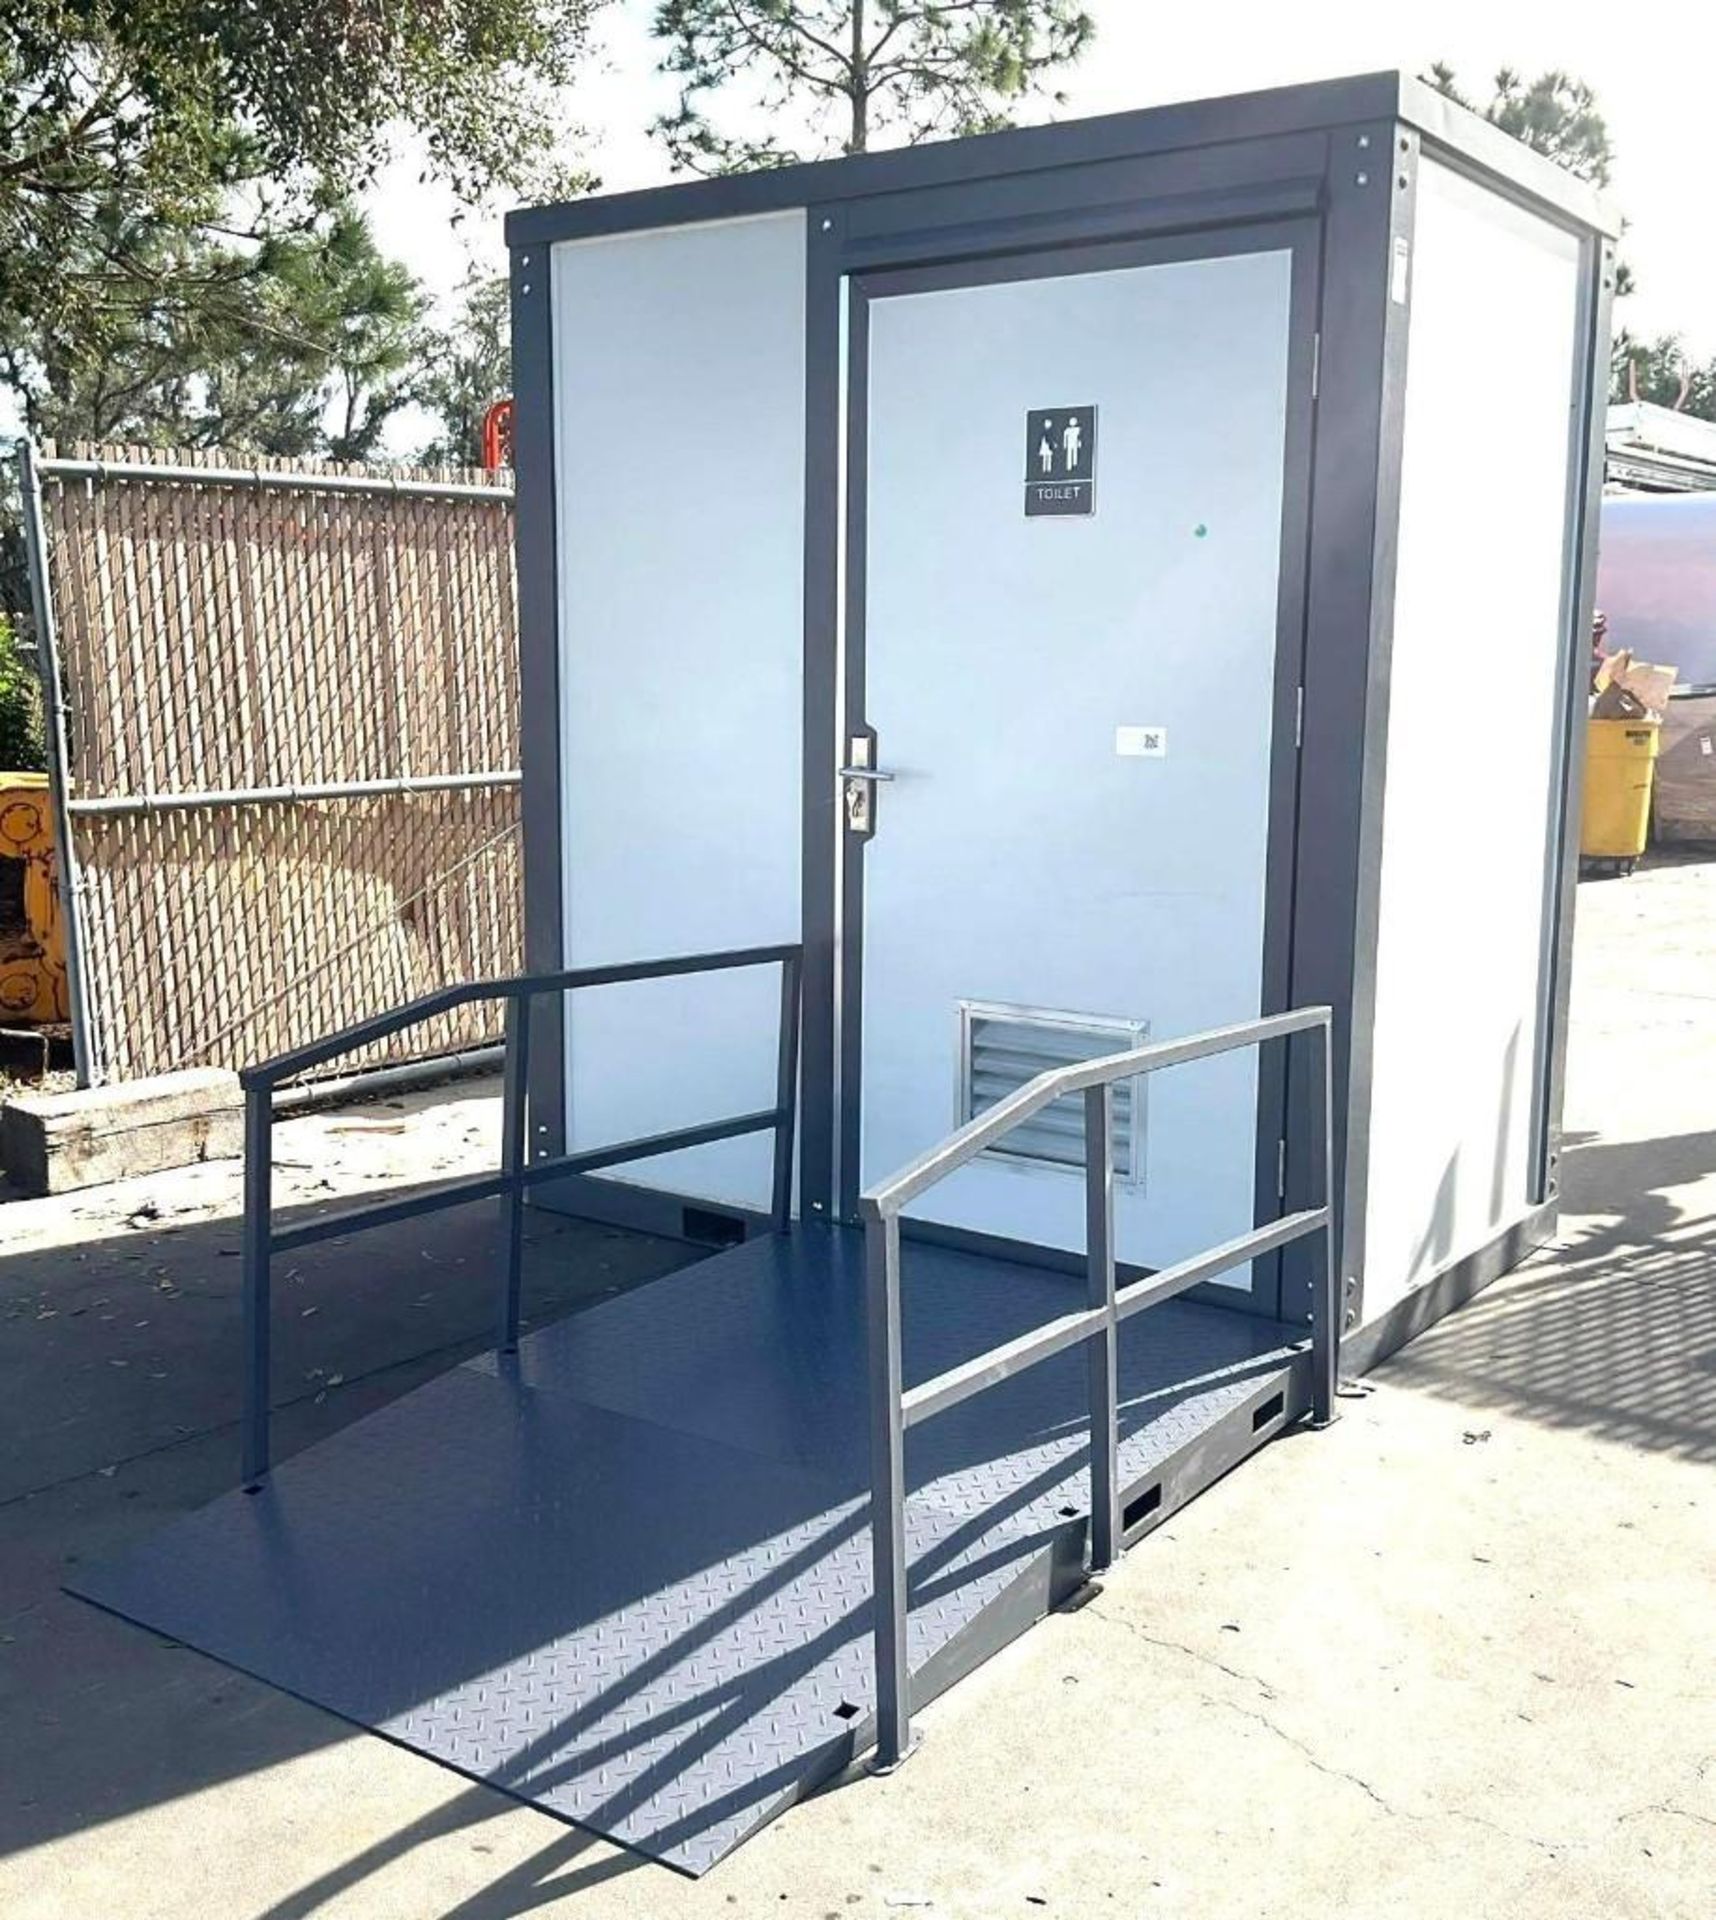 UNUSED PORTABLE HANDICAP BATHROOM UNIT WITH HANDICAP ACCESSIBLE, ELECTRIC & PLUMBING HOOK UP WITH... - Image 18 of 18